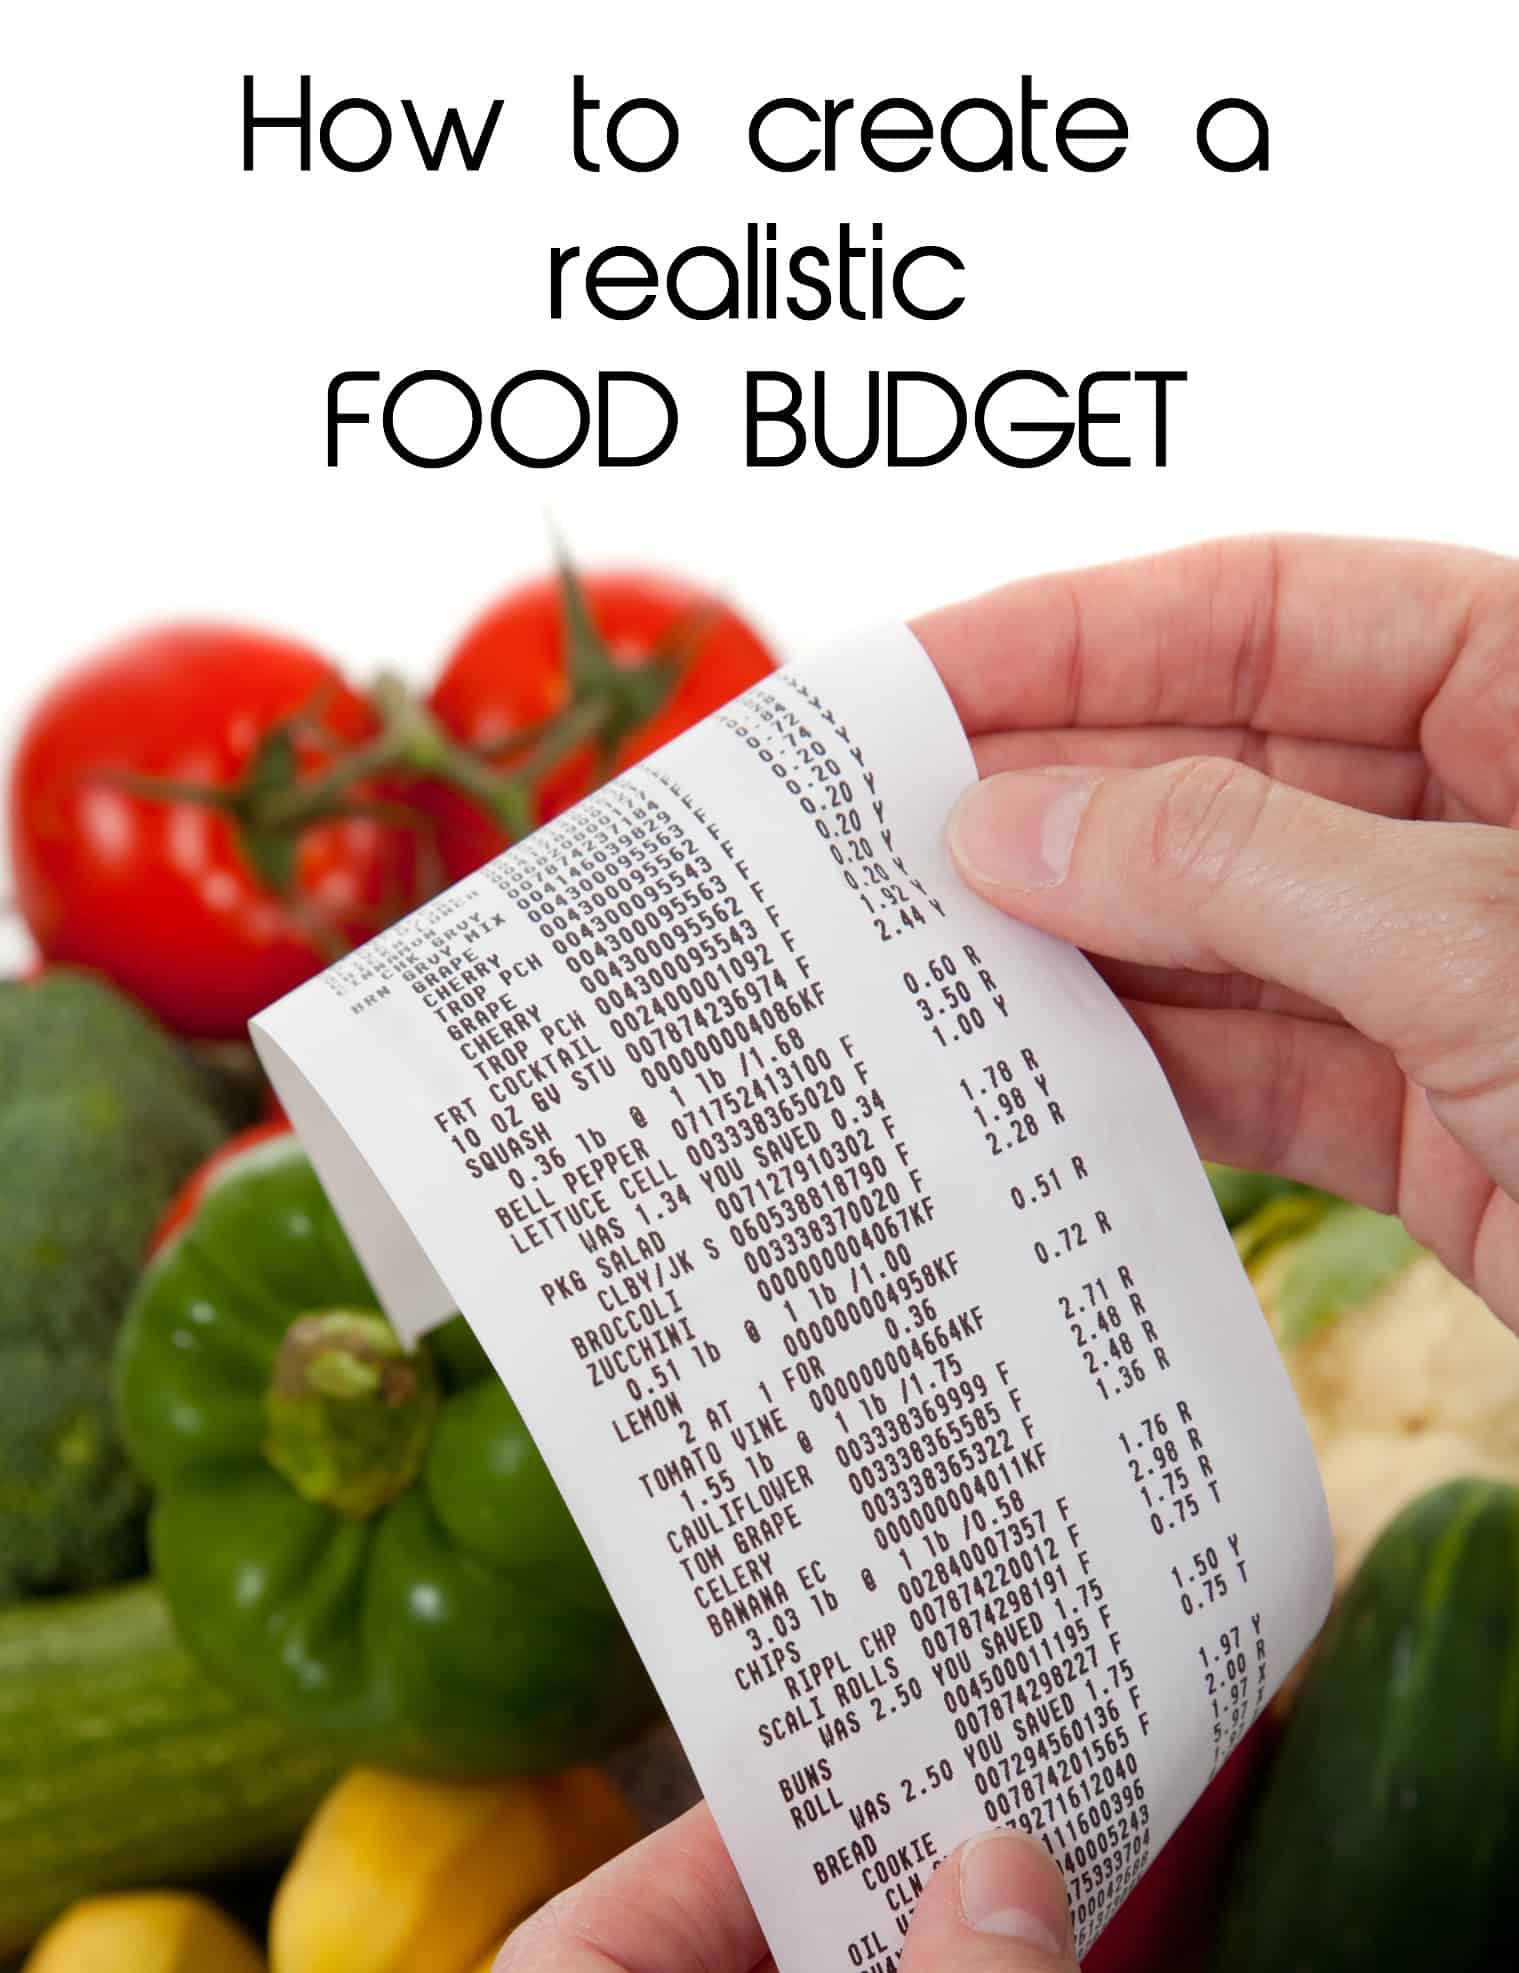 How to create a realistic food budget